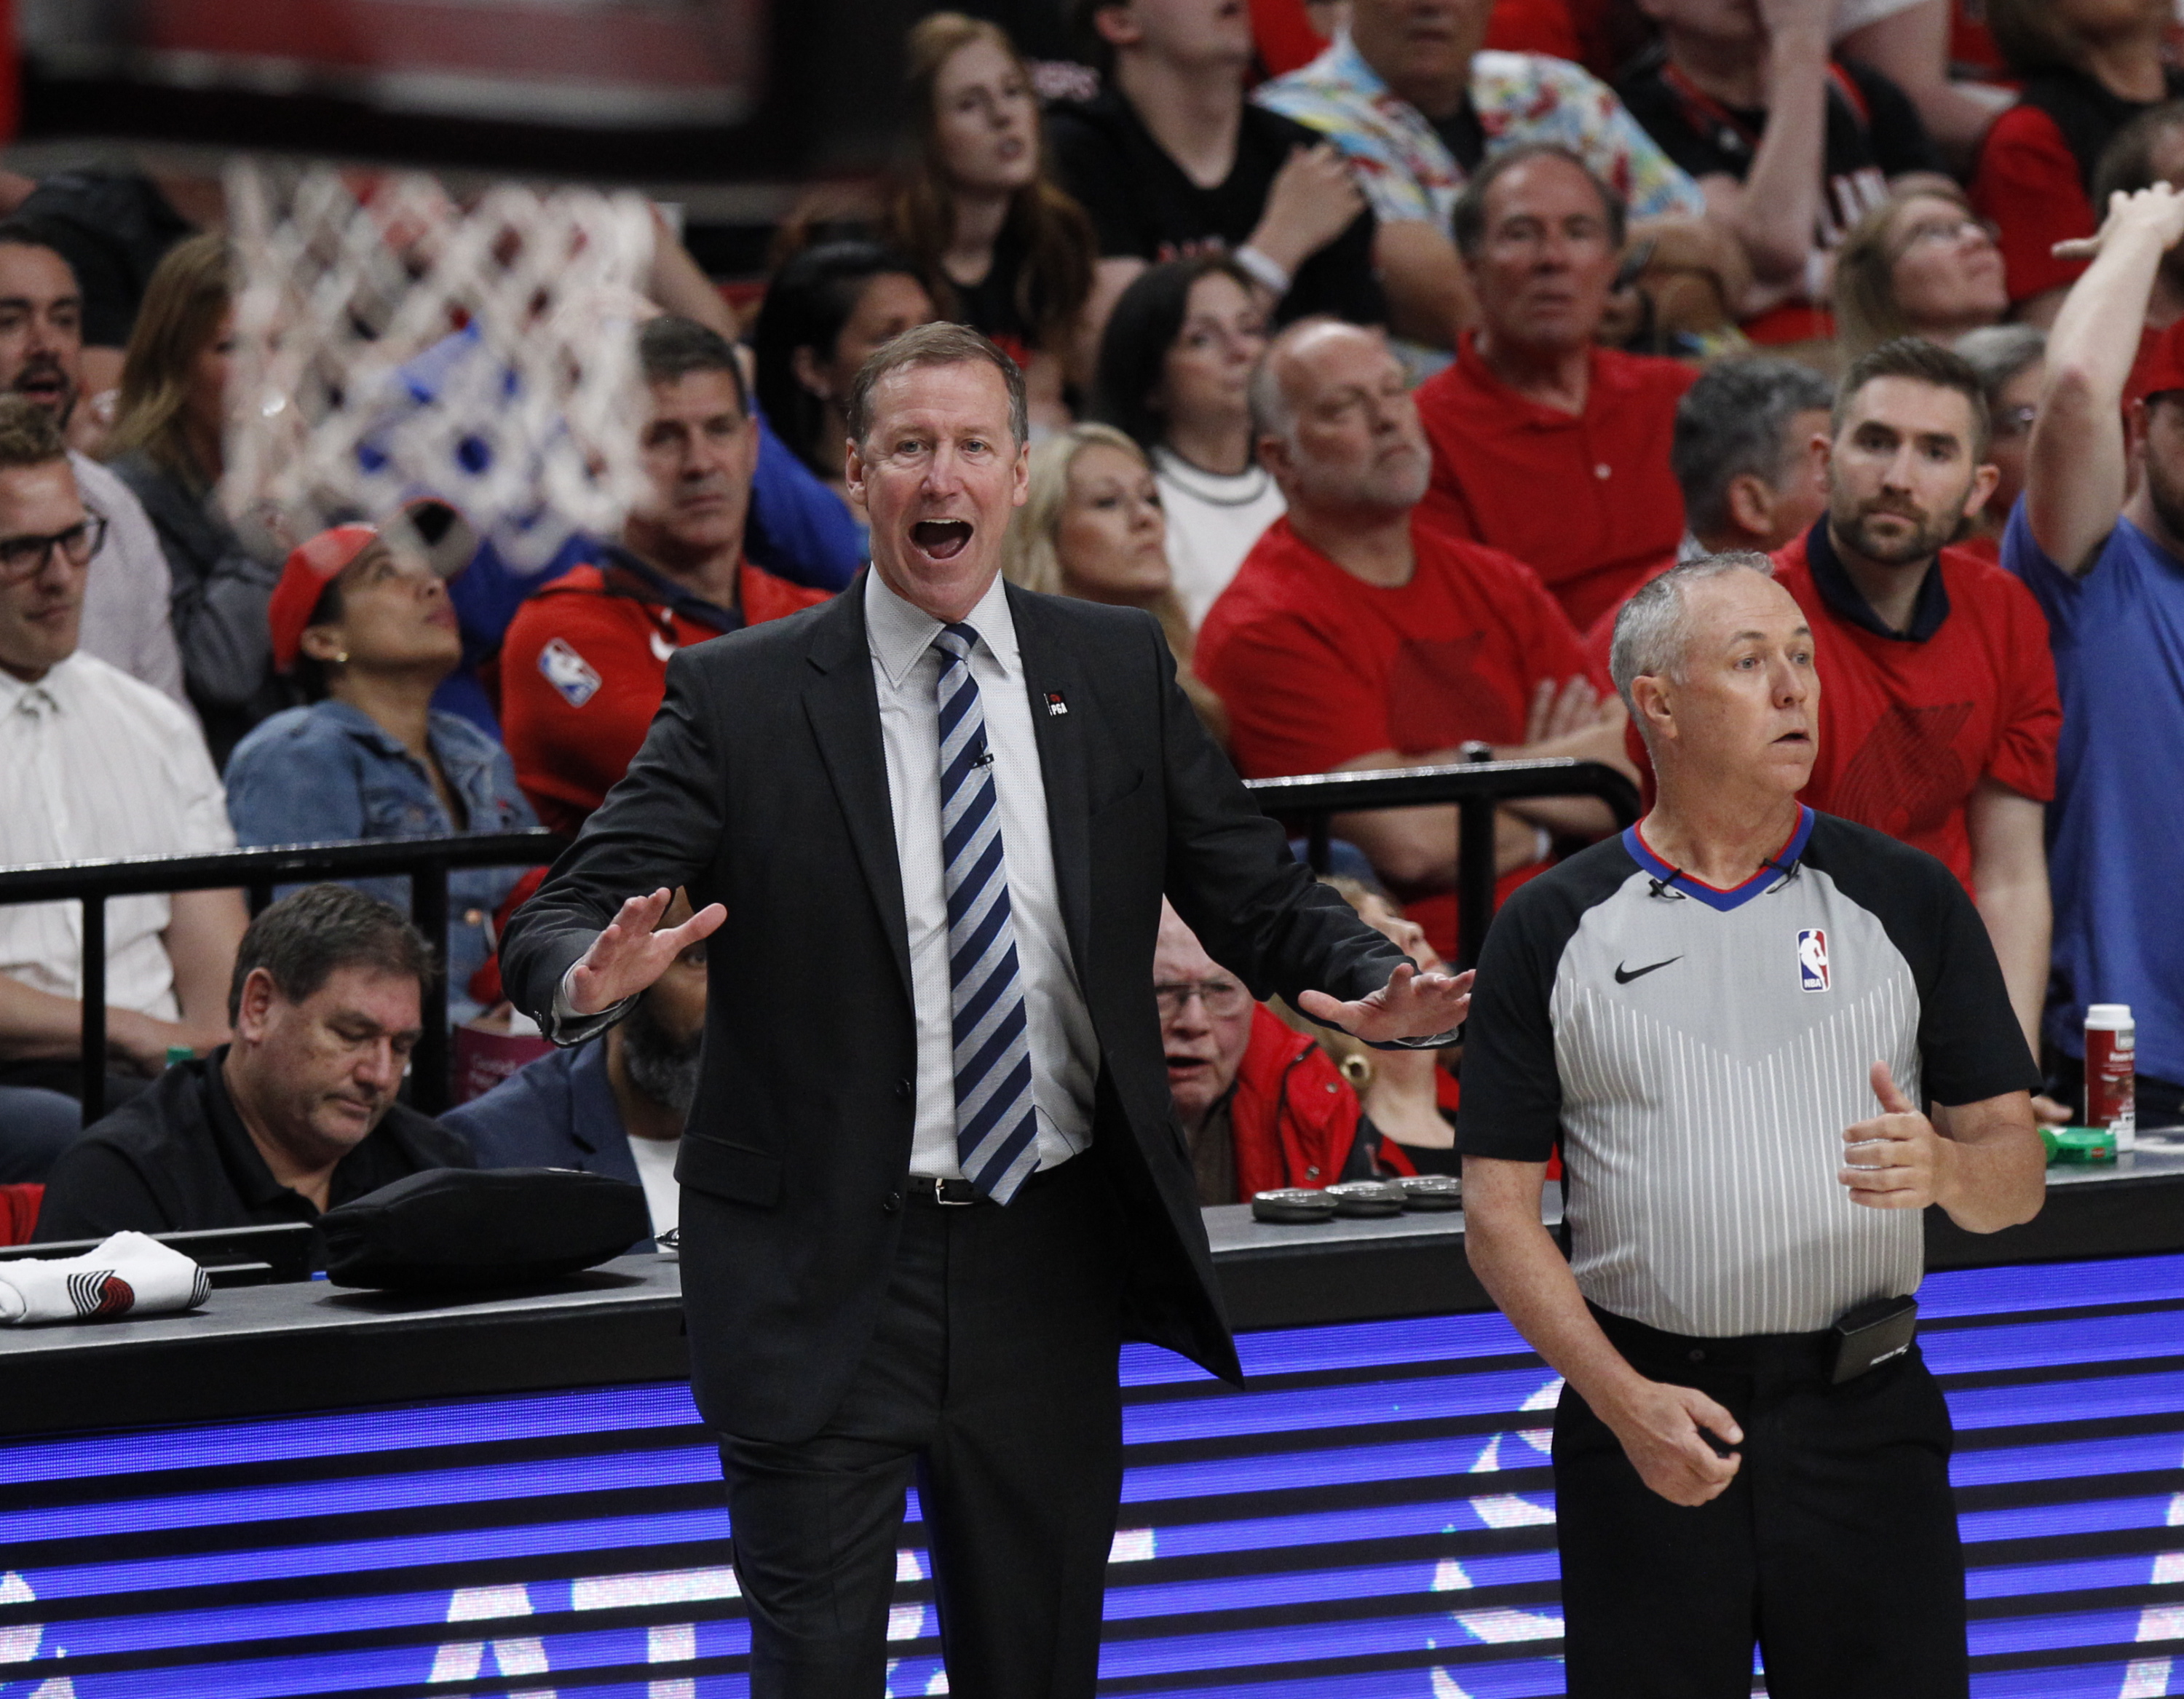 epa07550212 Portland Trail Blazers head coach Terry Stotts (L) reacts on the sideline during the NBA Western Conference second round playoff basketball game four between the Denver Nuggets and the Portland Trail Blazers at the Moda Center in Portland, Oregon, USA, 05 May 2019.  EPA/STEVE DIPAOLA  SHUTTERSTOCK OUT